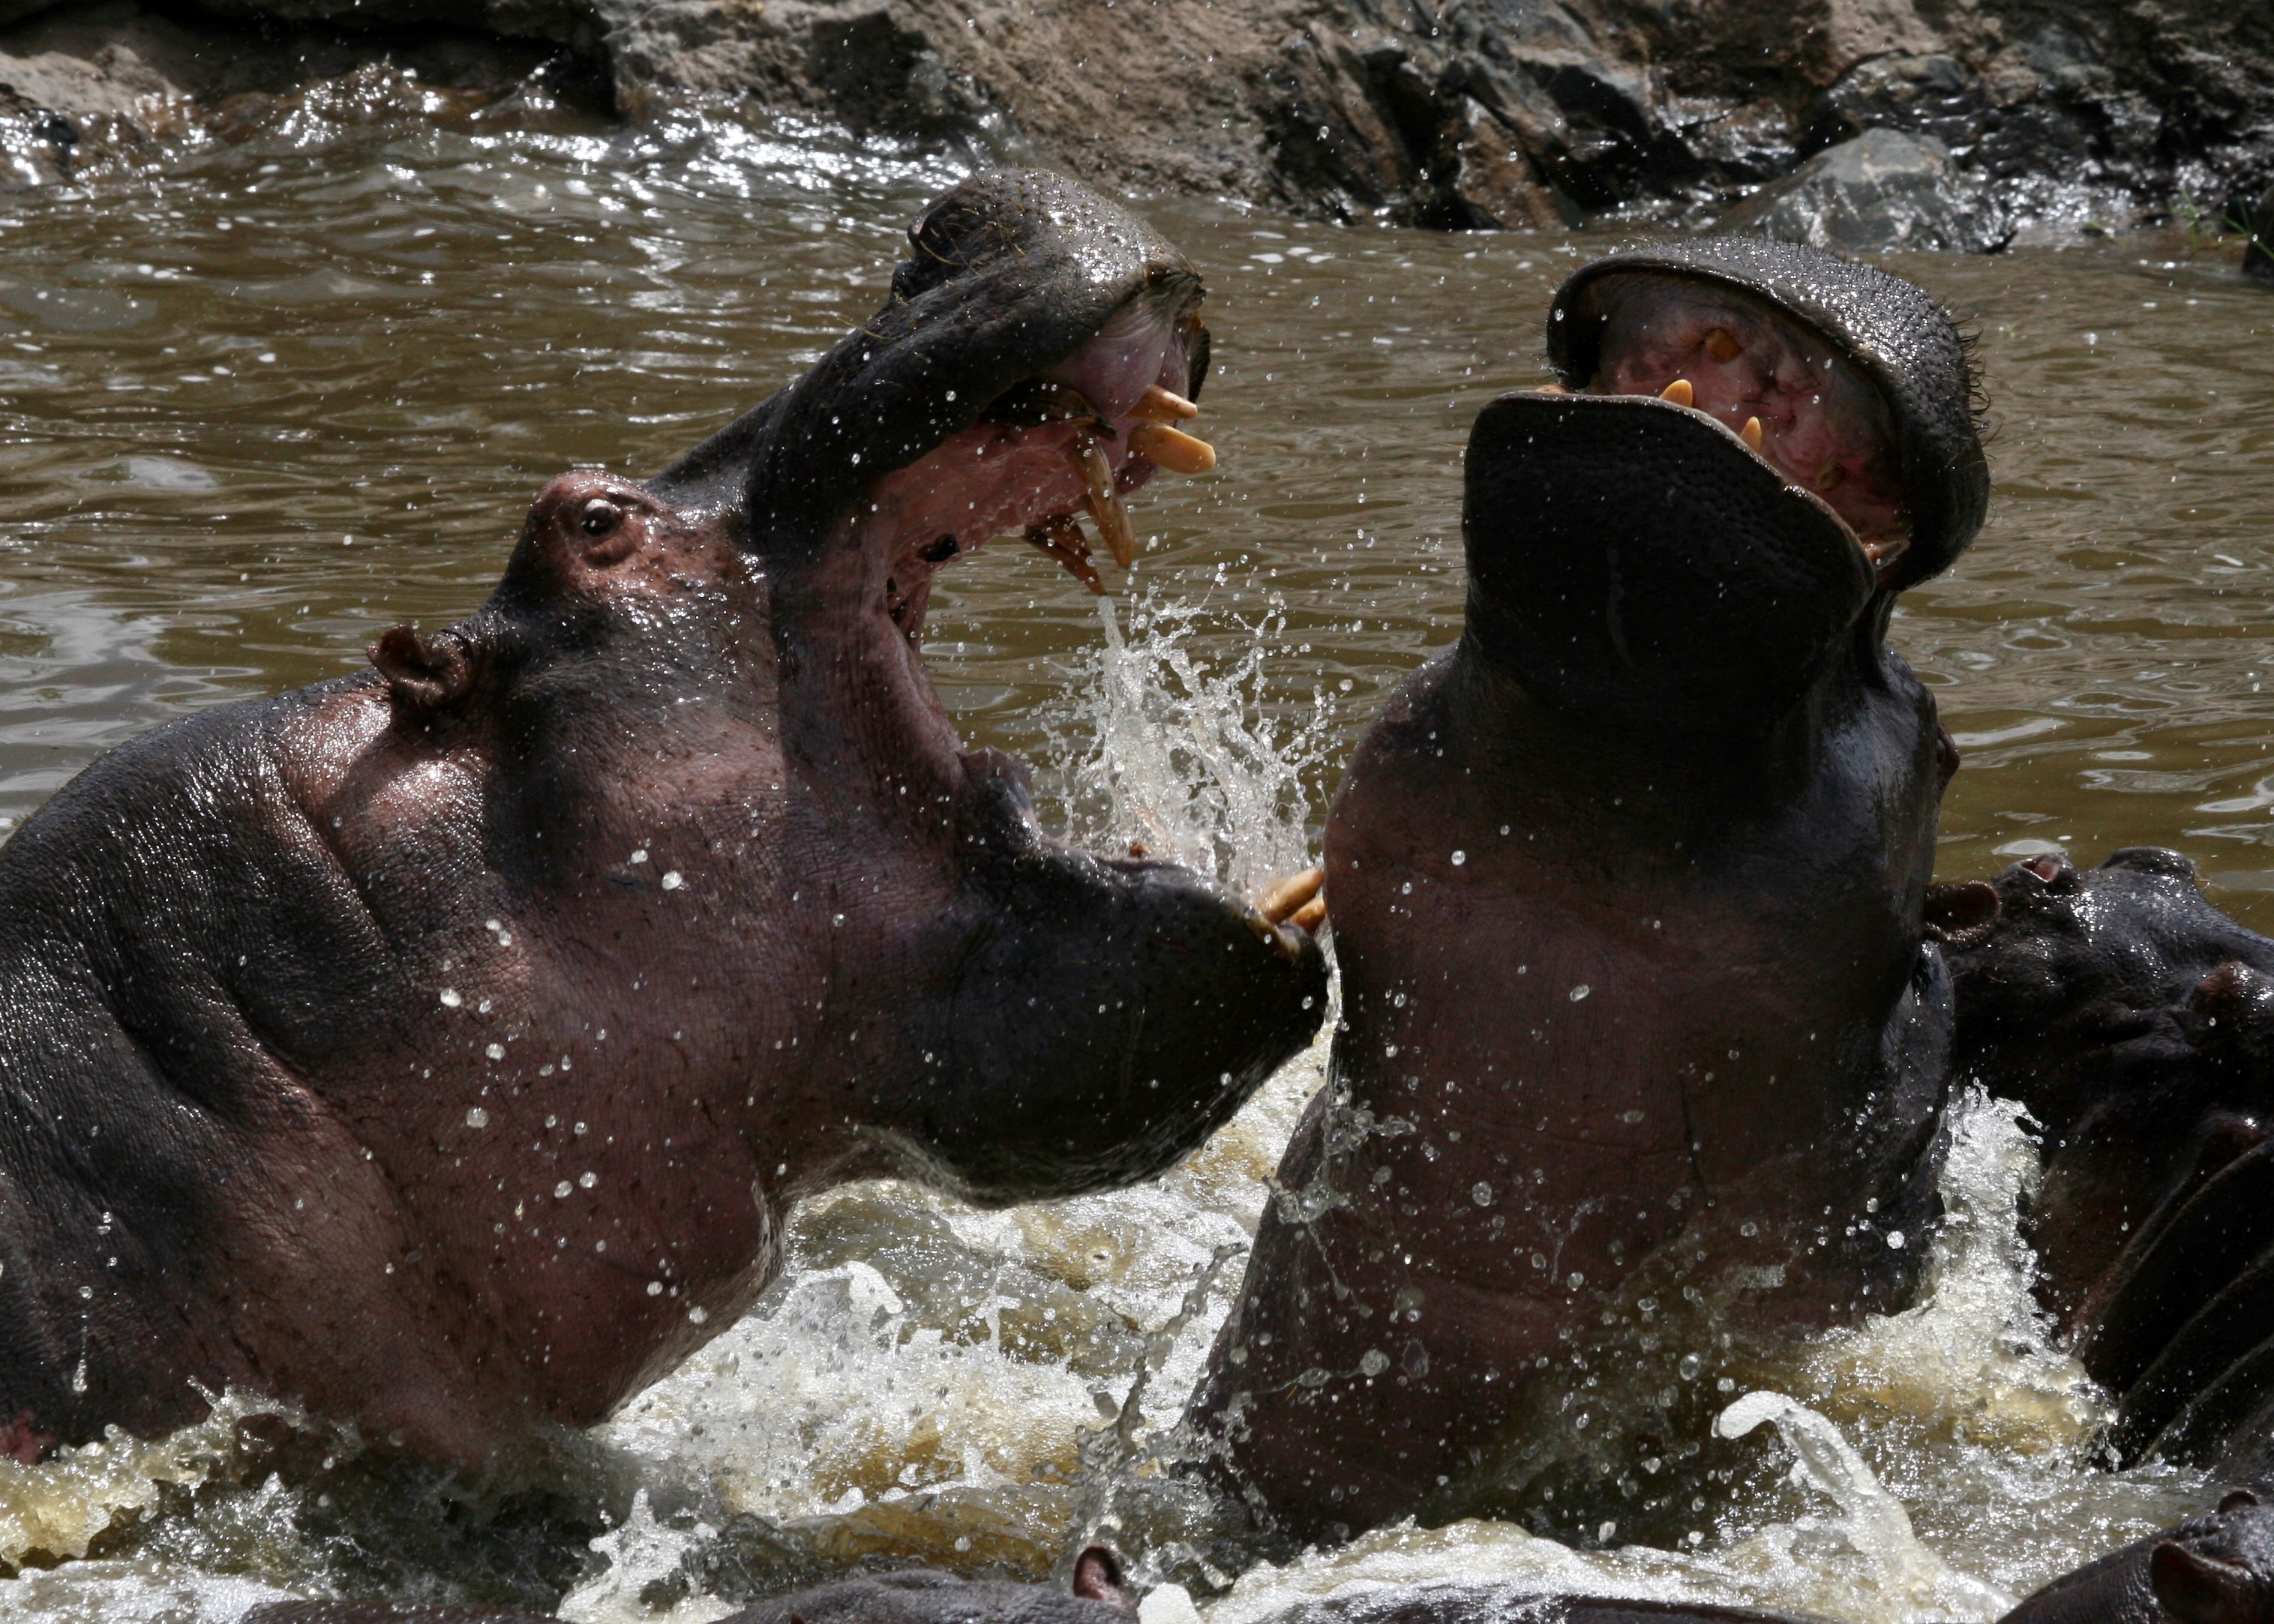 Hightlights for students taking part in the “Biodiversity and Conservation" class that traveled to and around Tanzania, included seeing wildlife in their native habitat, including these massive hippos.